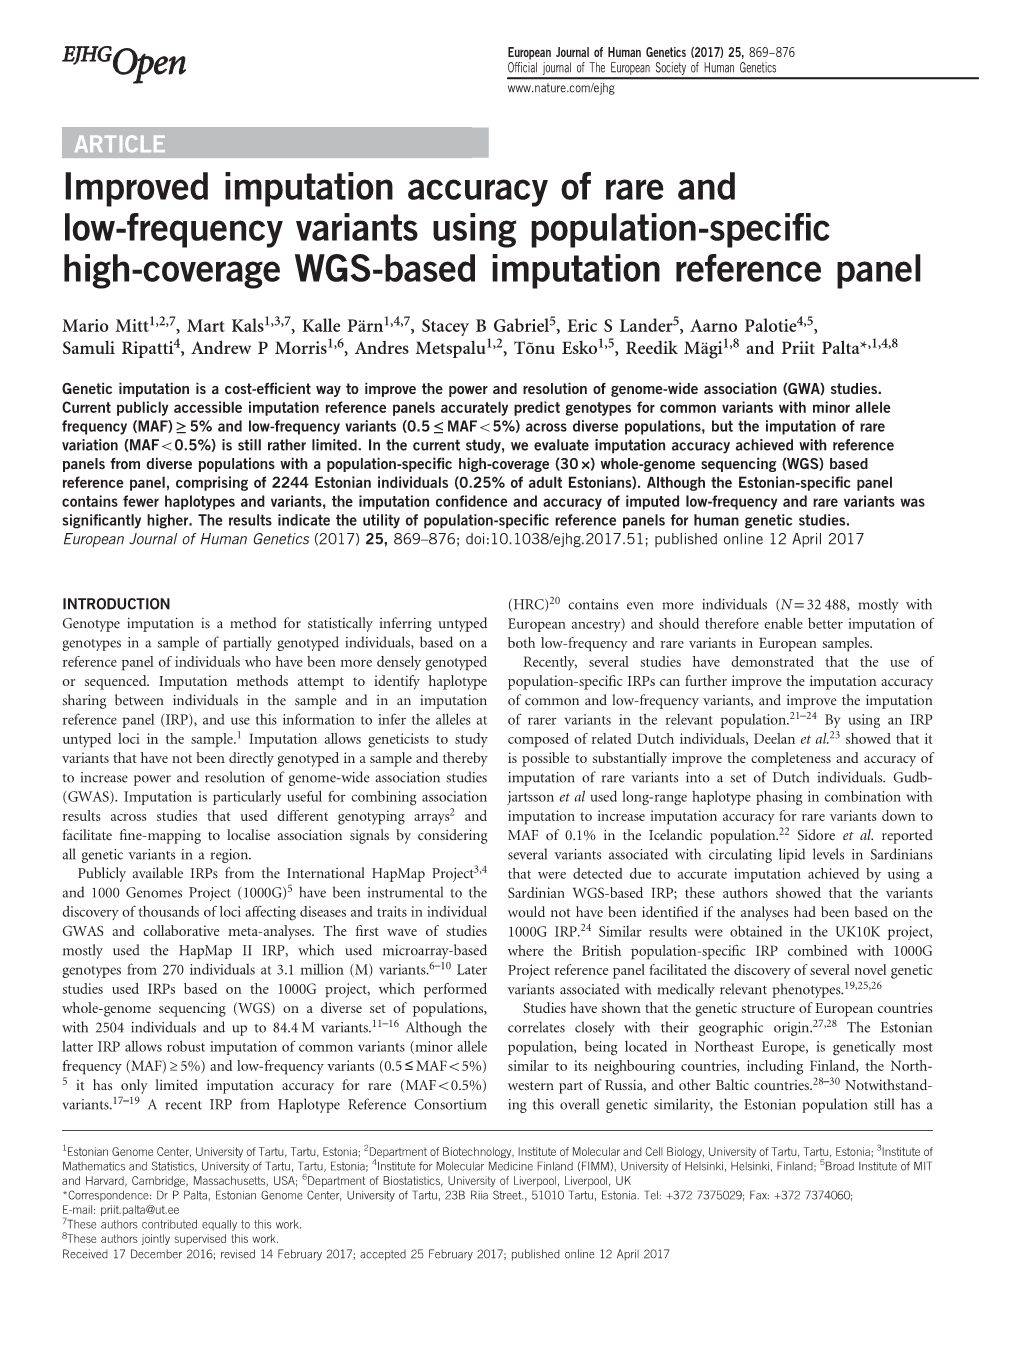 Improved Imputation Accuracy of Rare and Low-Frequency Variants Using Population-Speciﬁc High-Coverage WGS-Based Imputation Reference Panel